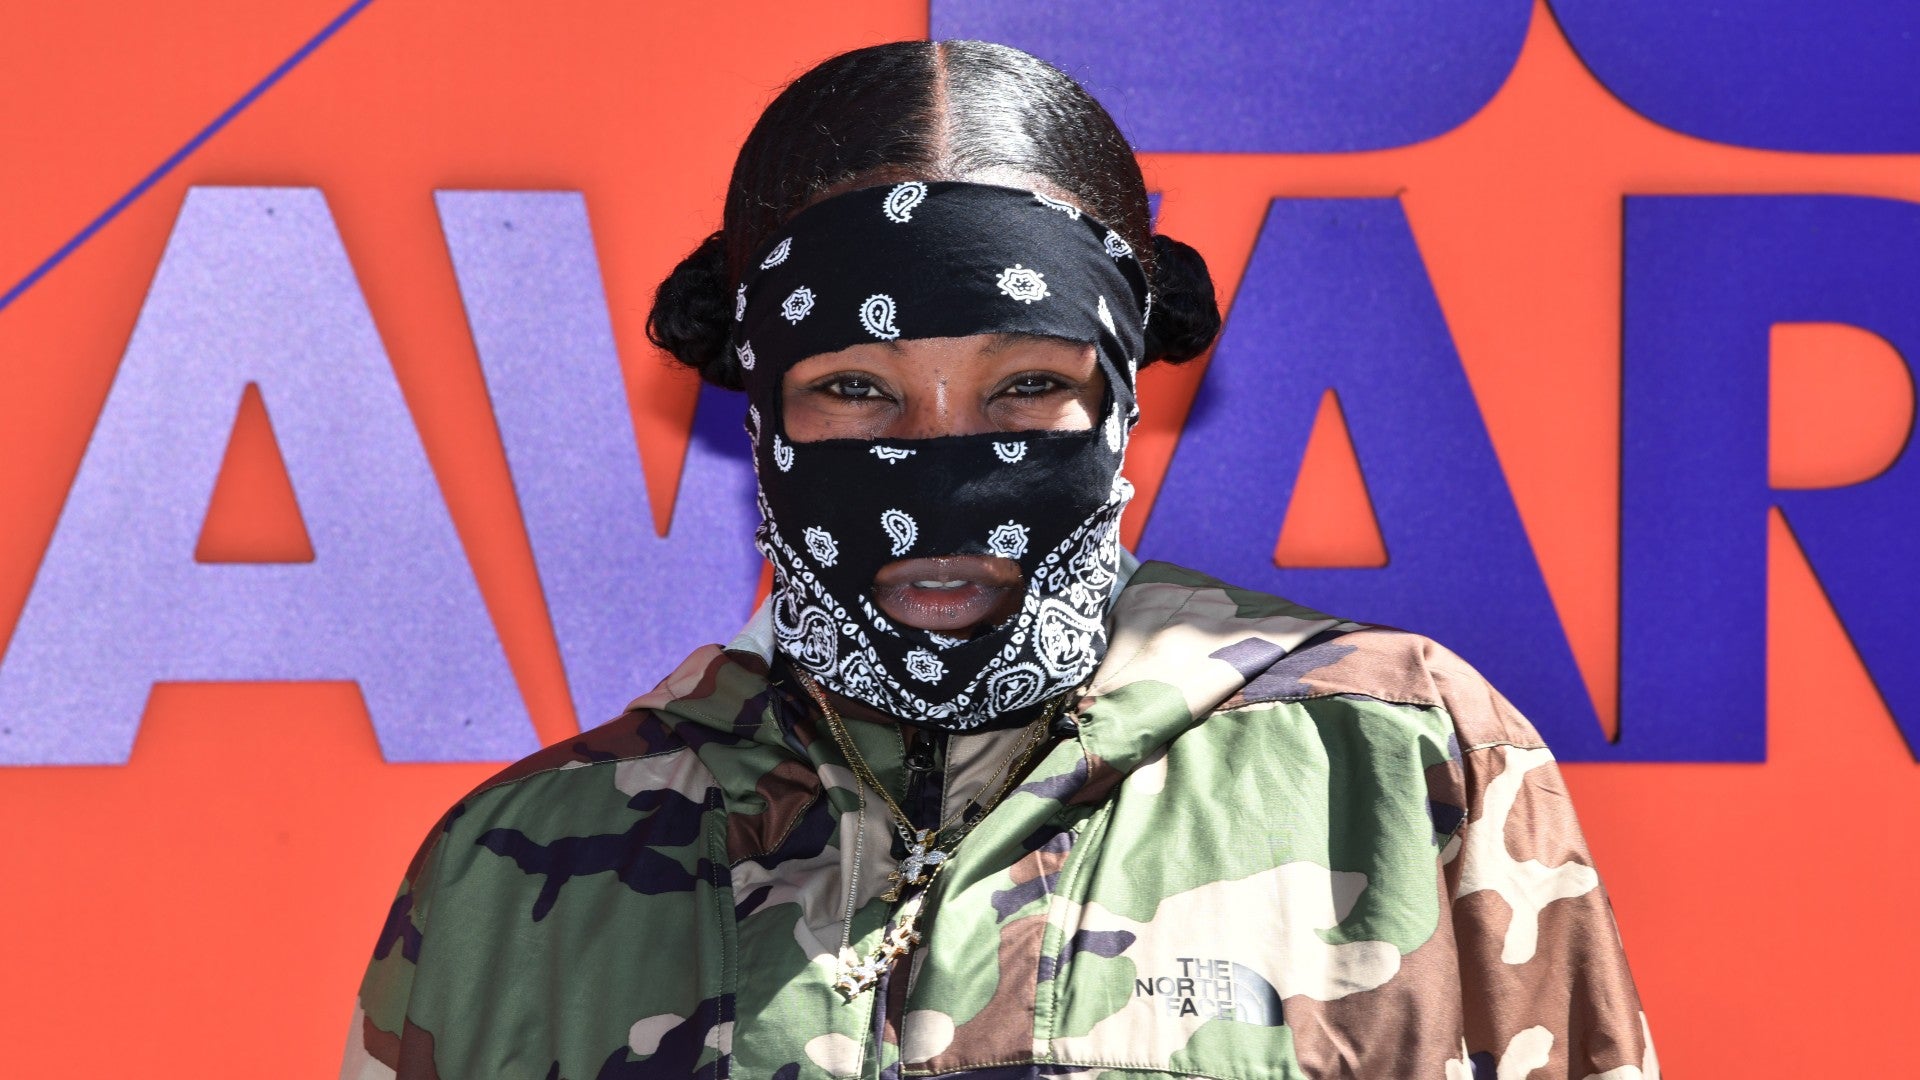 Leikeli47’s Love For Beauty And Fashion Makes Her The Perfect Ivy Park Muse